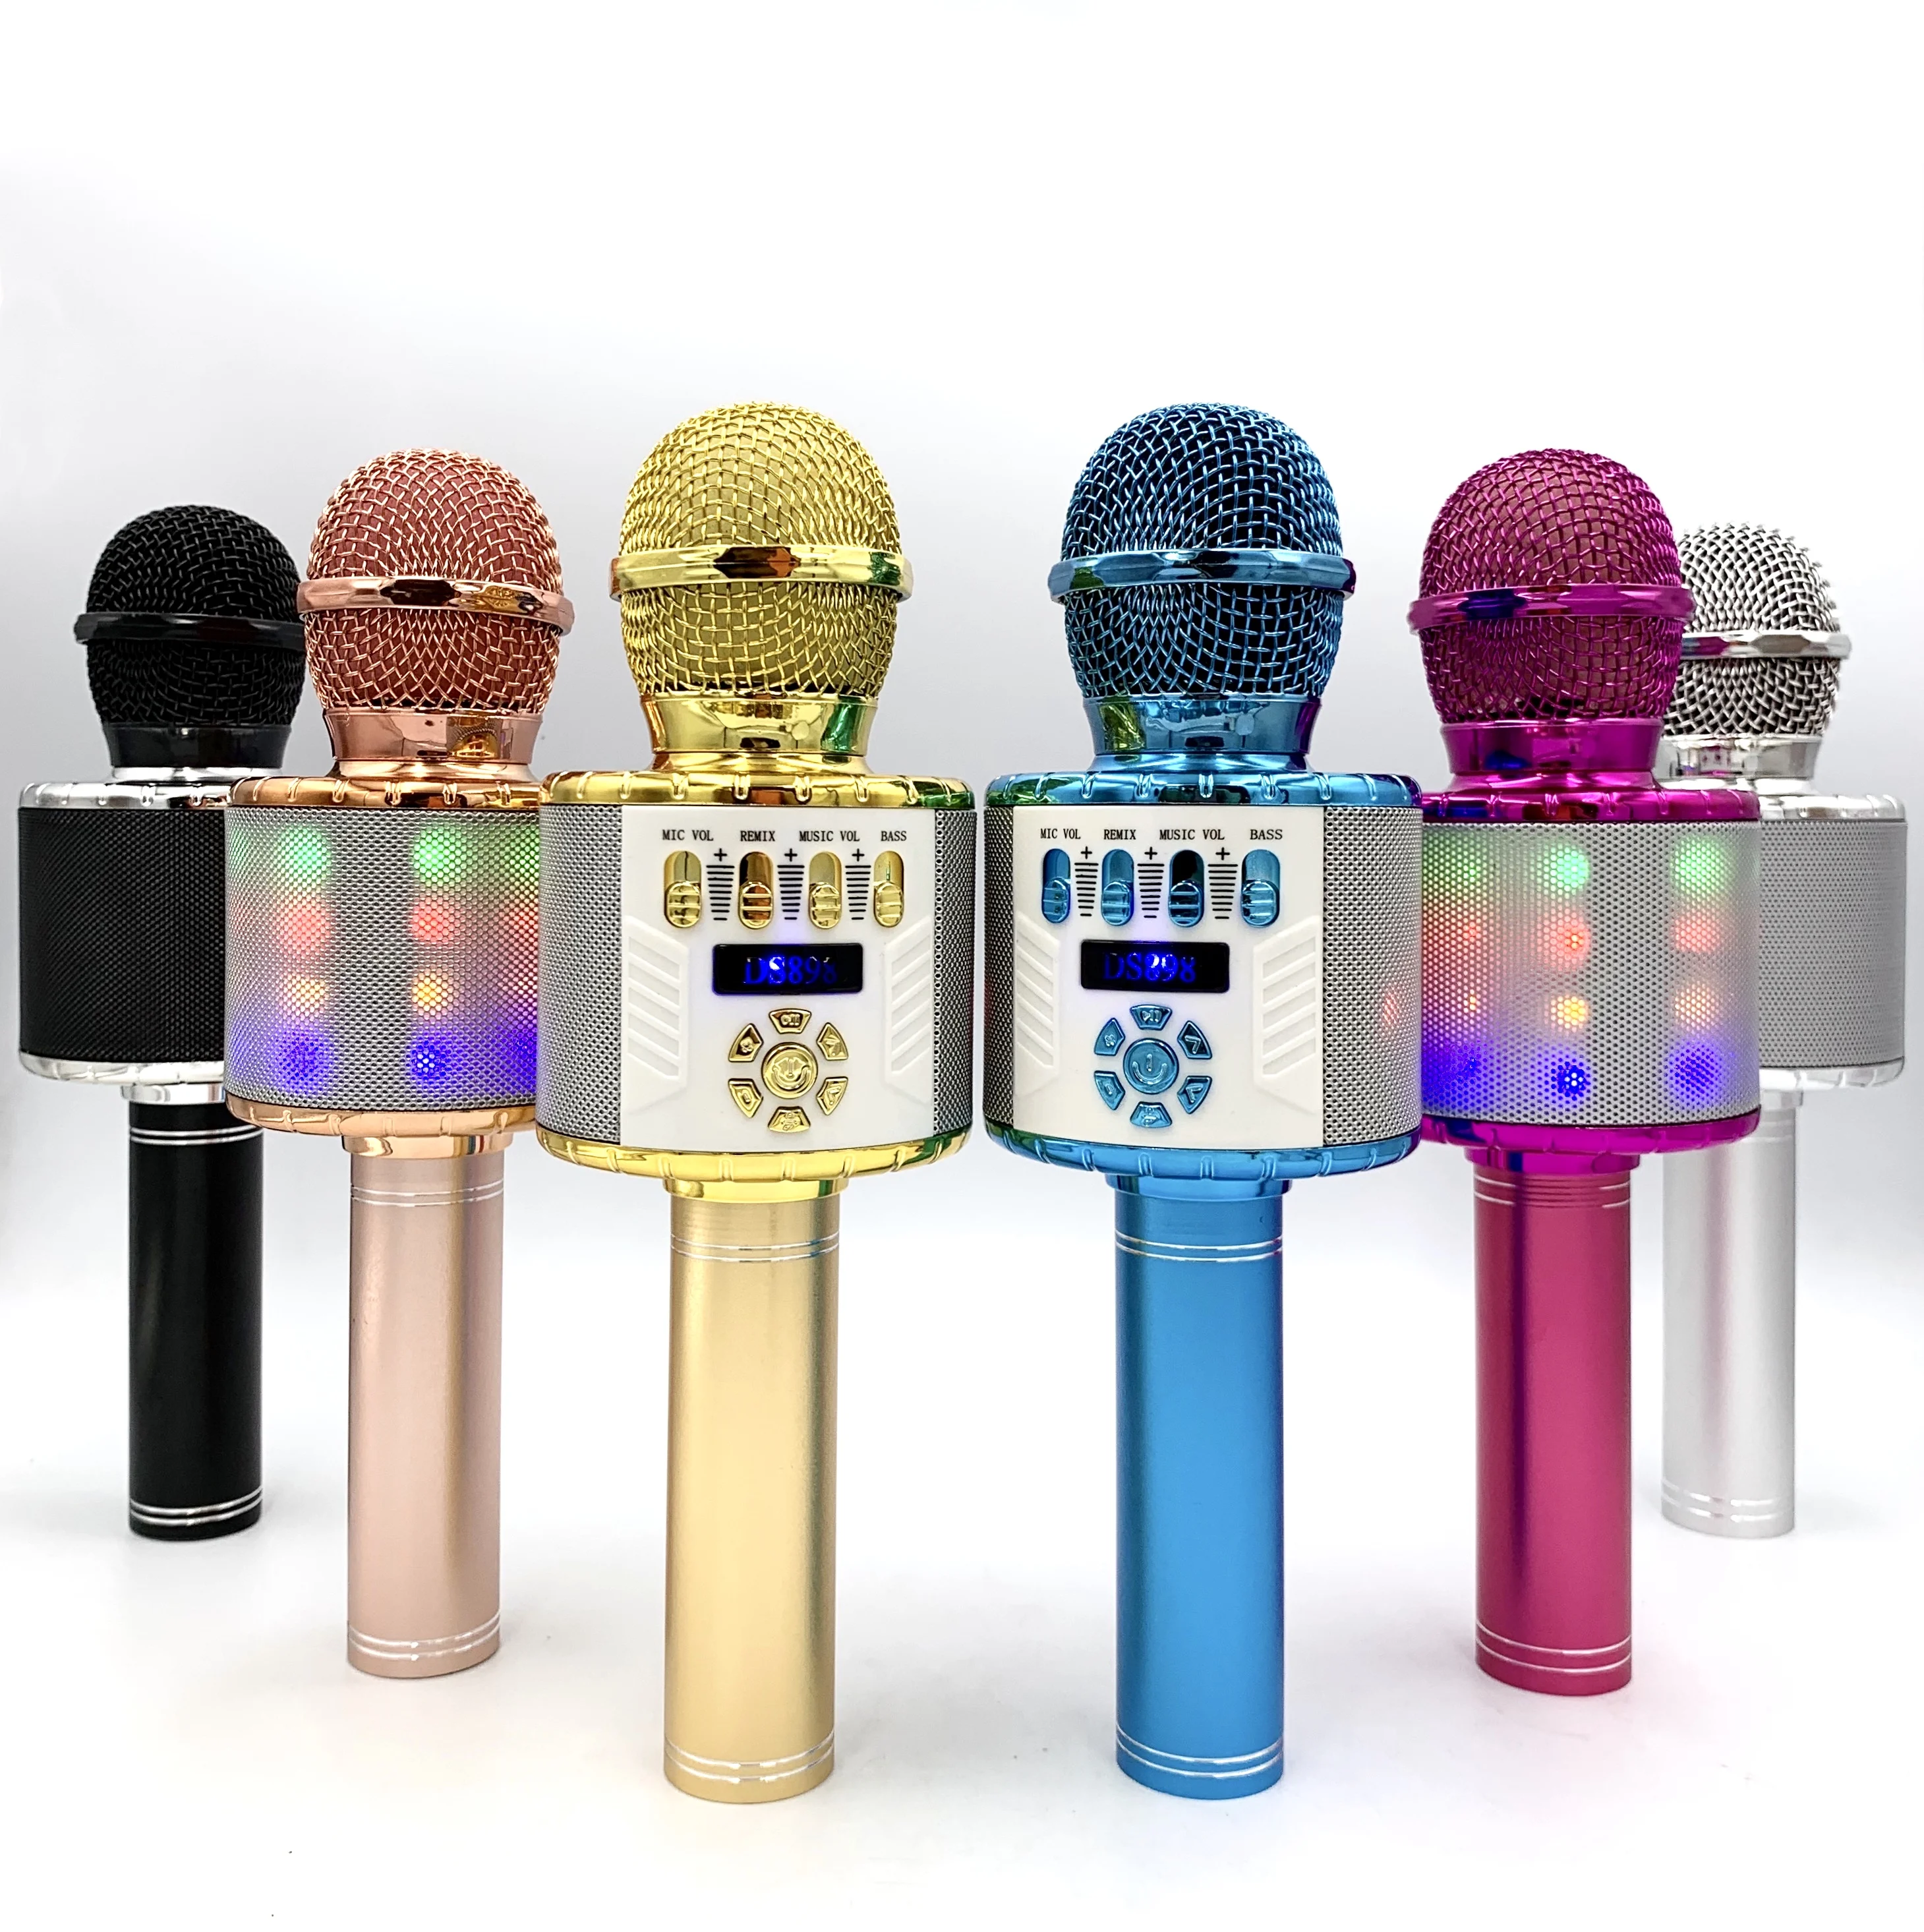 

Wireless Handheld KTV Blue tooth Speaker Sing Music Kids Karaoke Microphone With CE RoSH FCC For Birthday Gift Party DS898, Black ,gold ,rosegold,blue,pink,silver